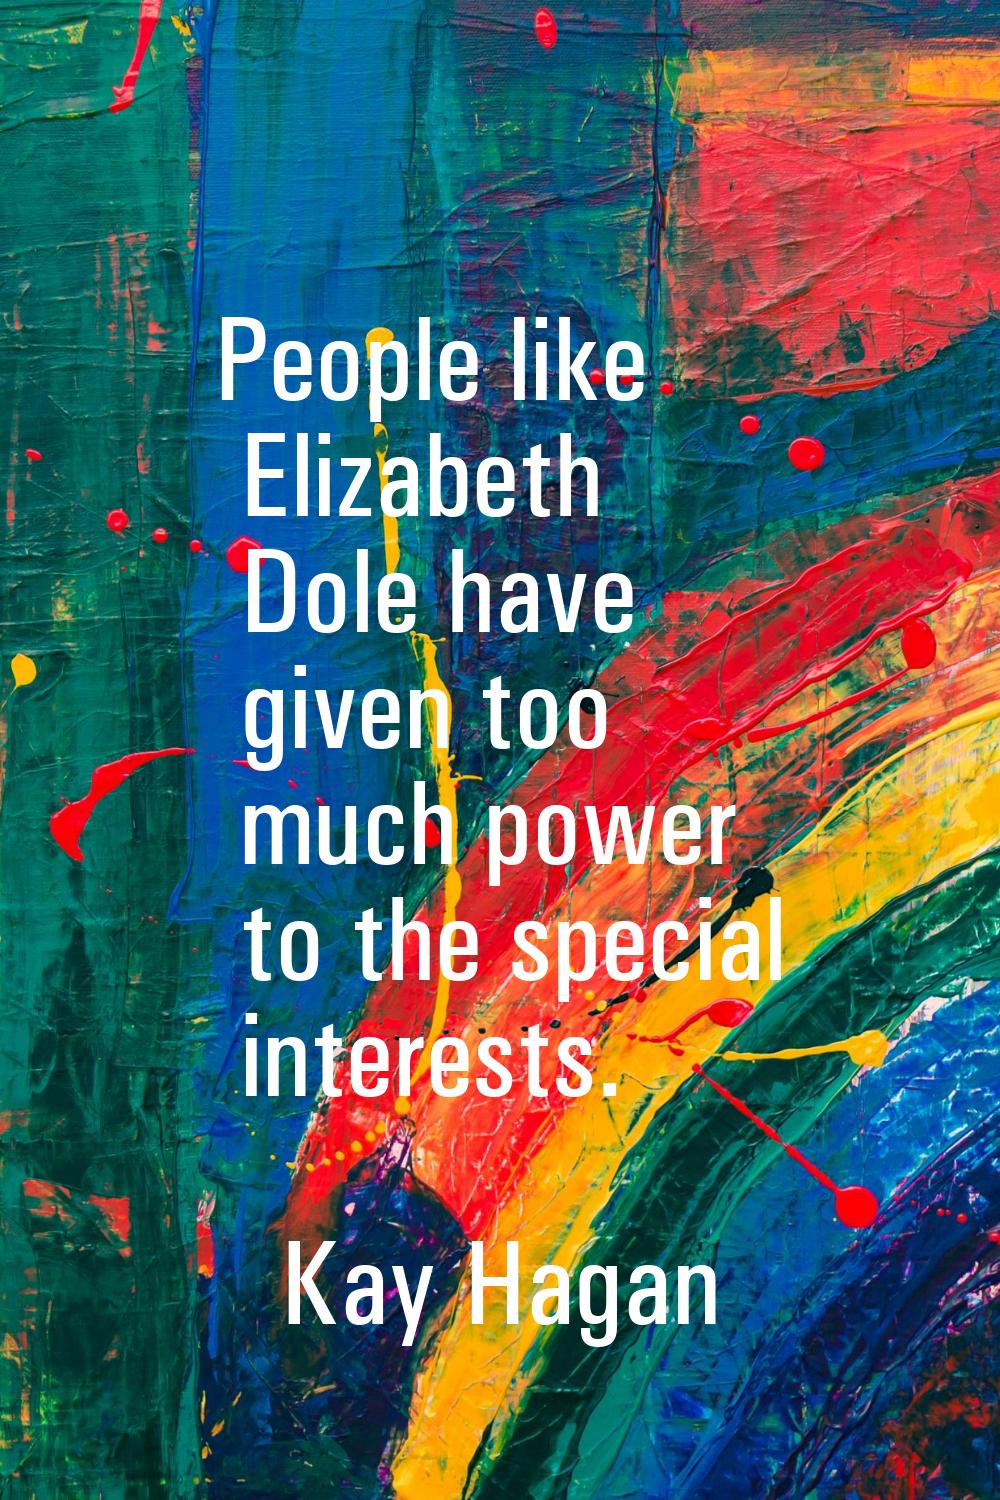 People like Elizabeth Dole have given too much power to the special interests.